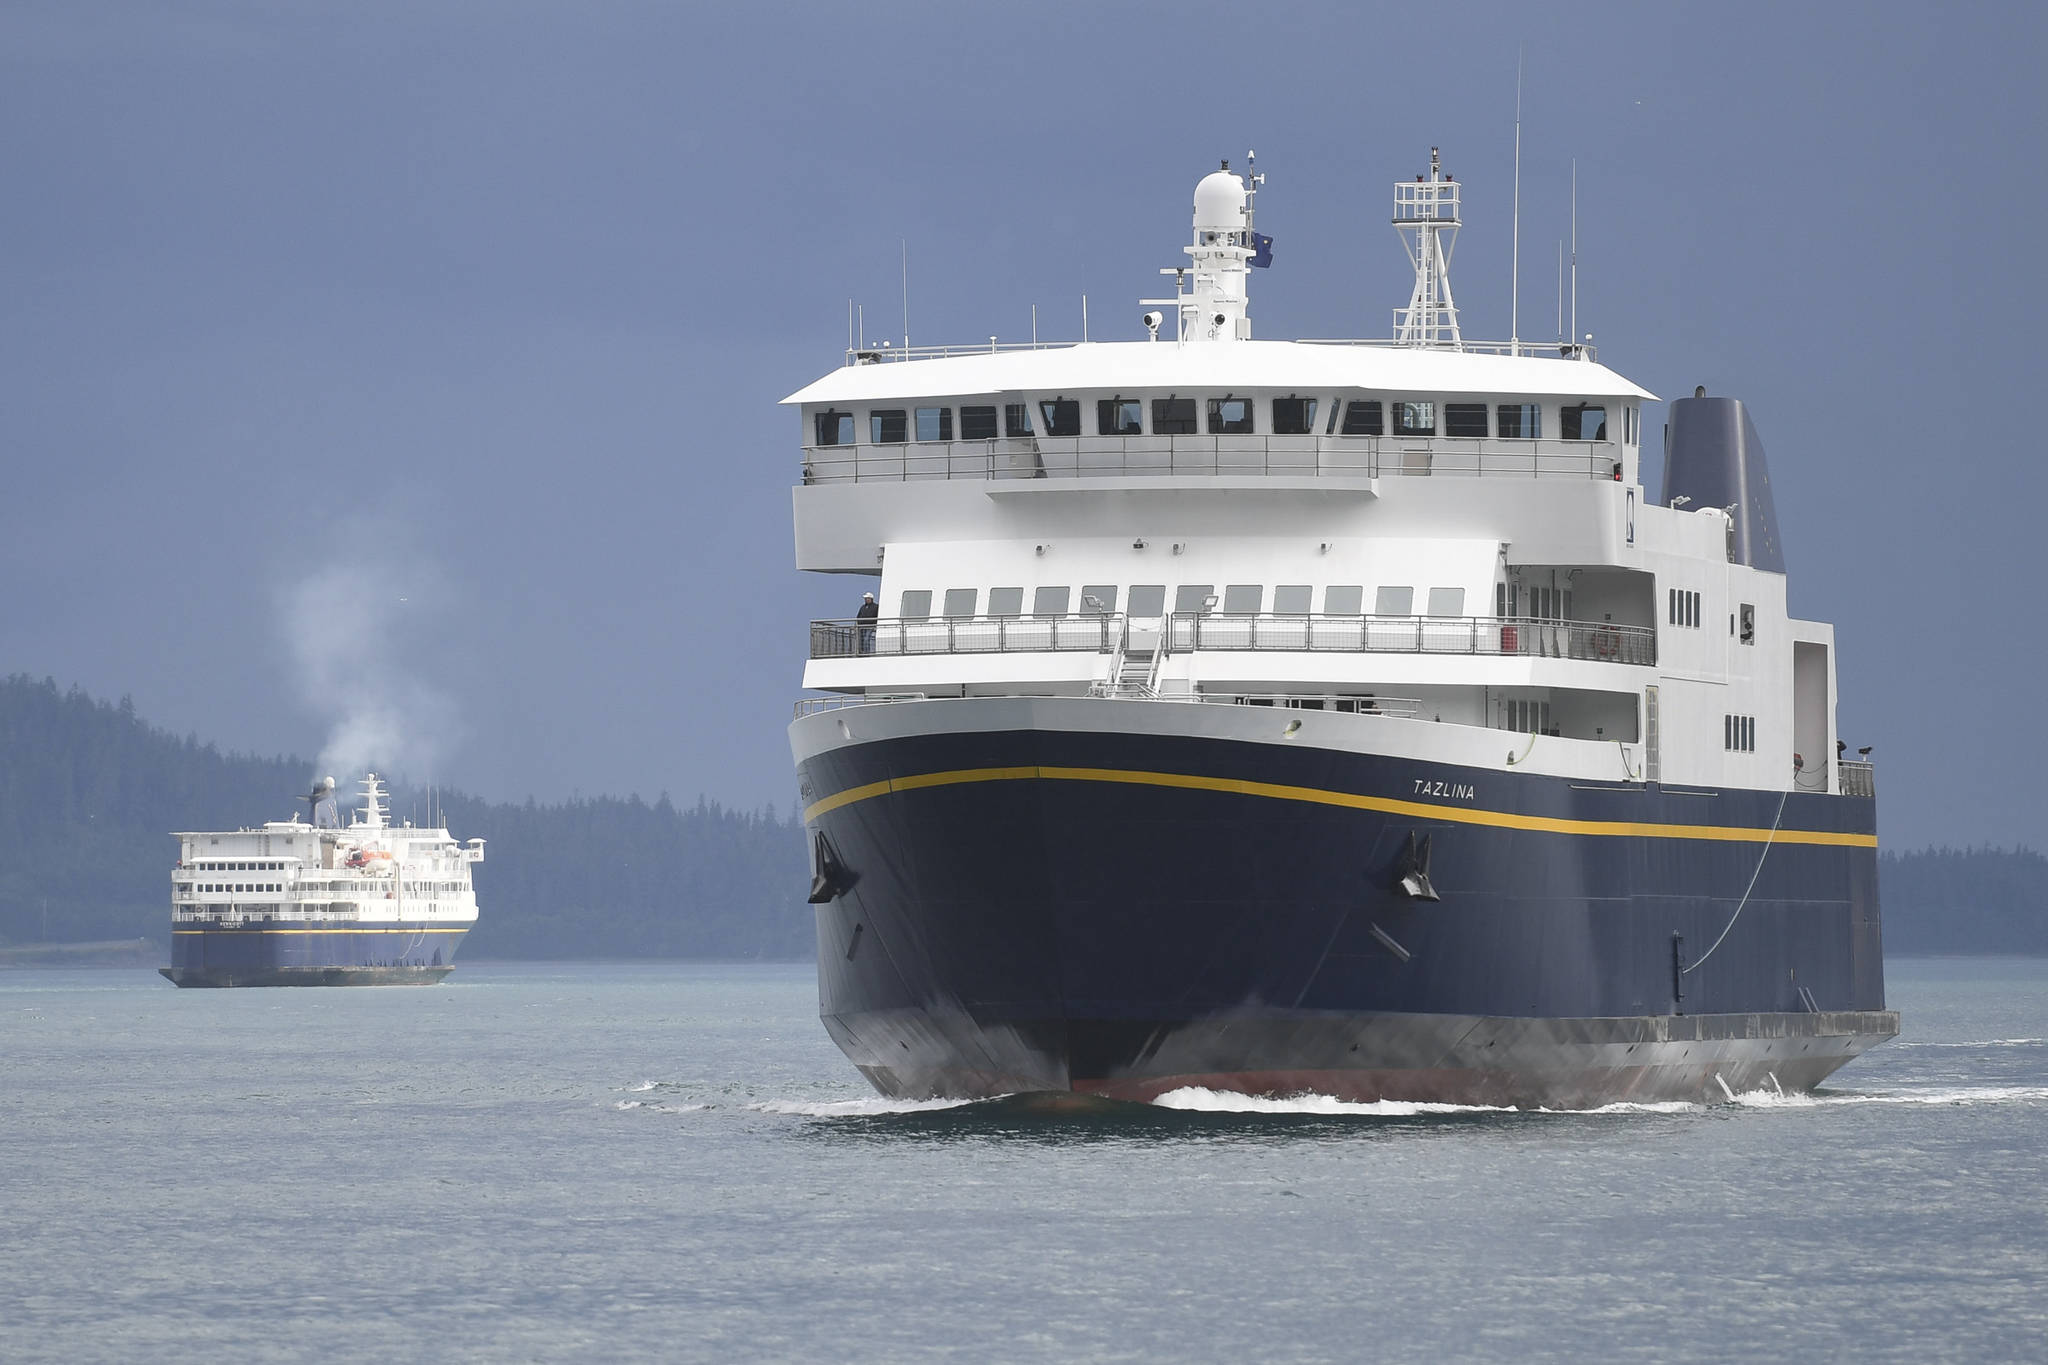 Wrestling with lack of ferry service, Angoon explores stop-gap measure